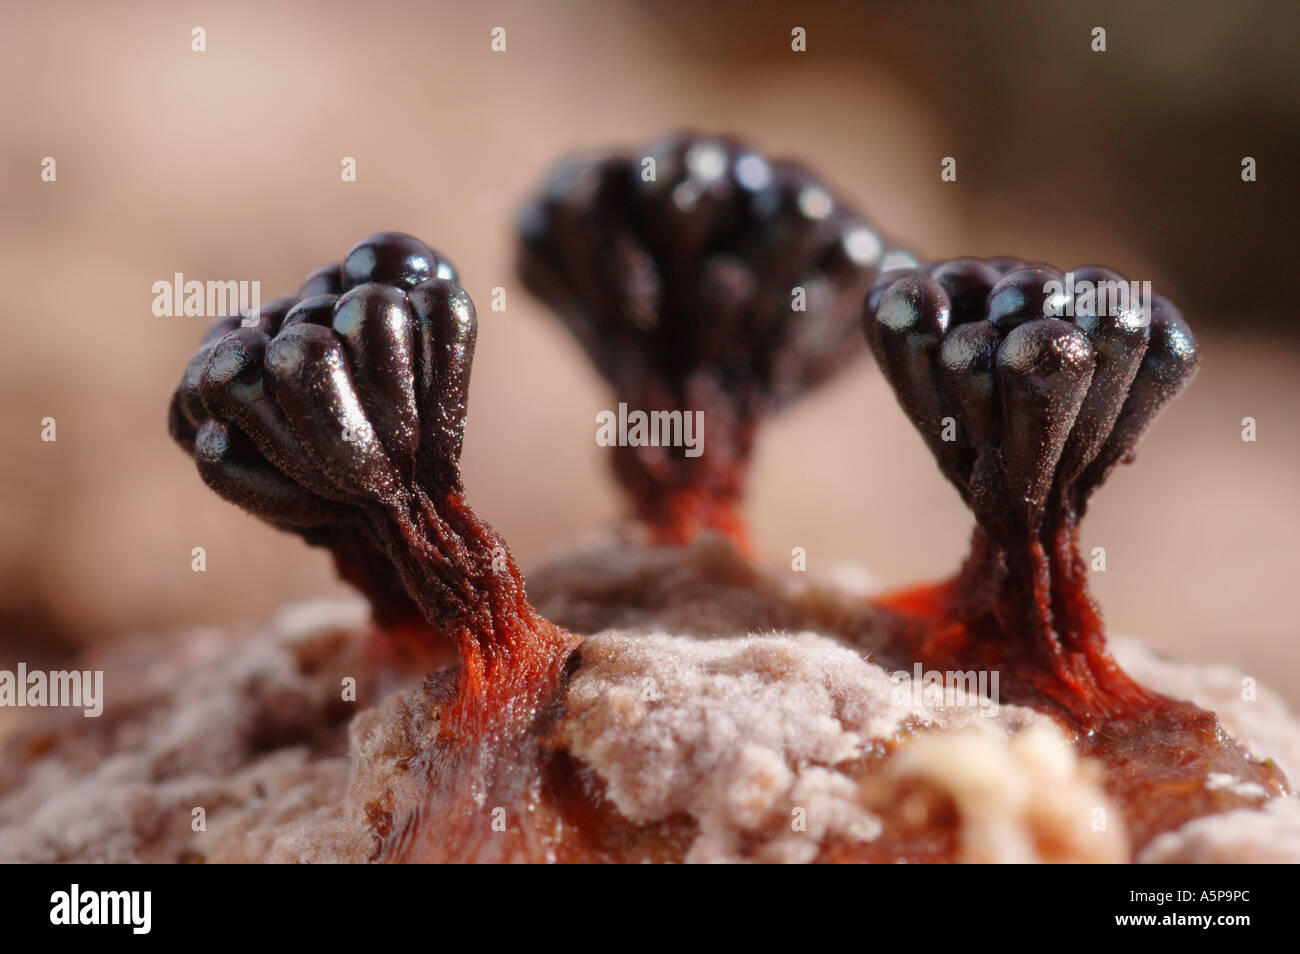 Close up of three fruiting bodies of black slime mould or myxomycete Metatrichia vesparium groving on decay wood Stock Photo